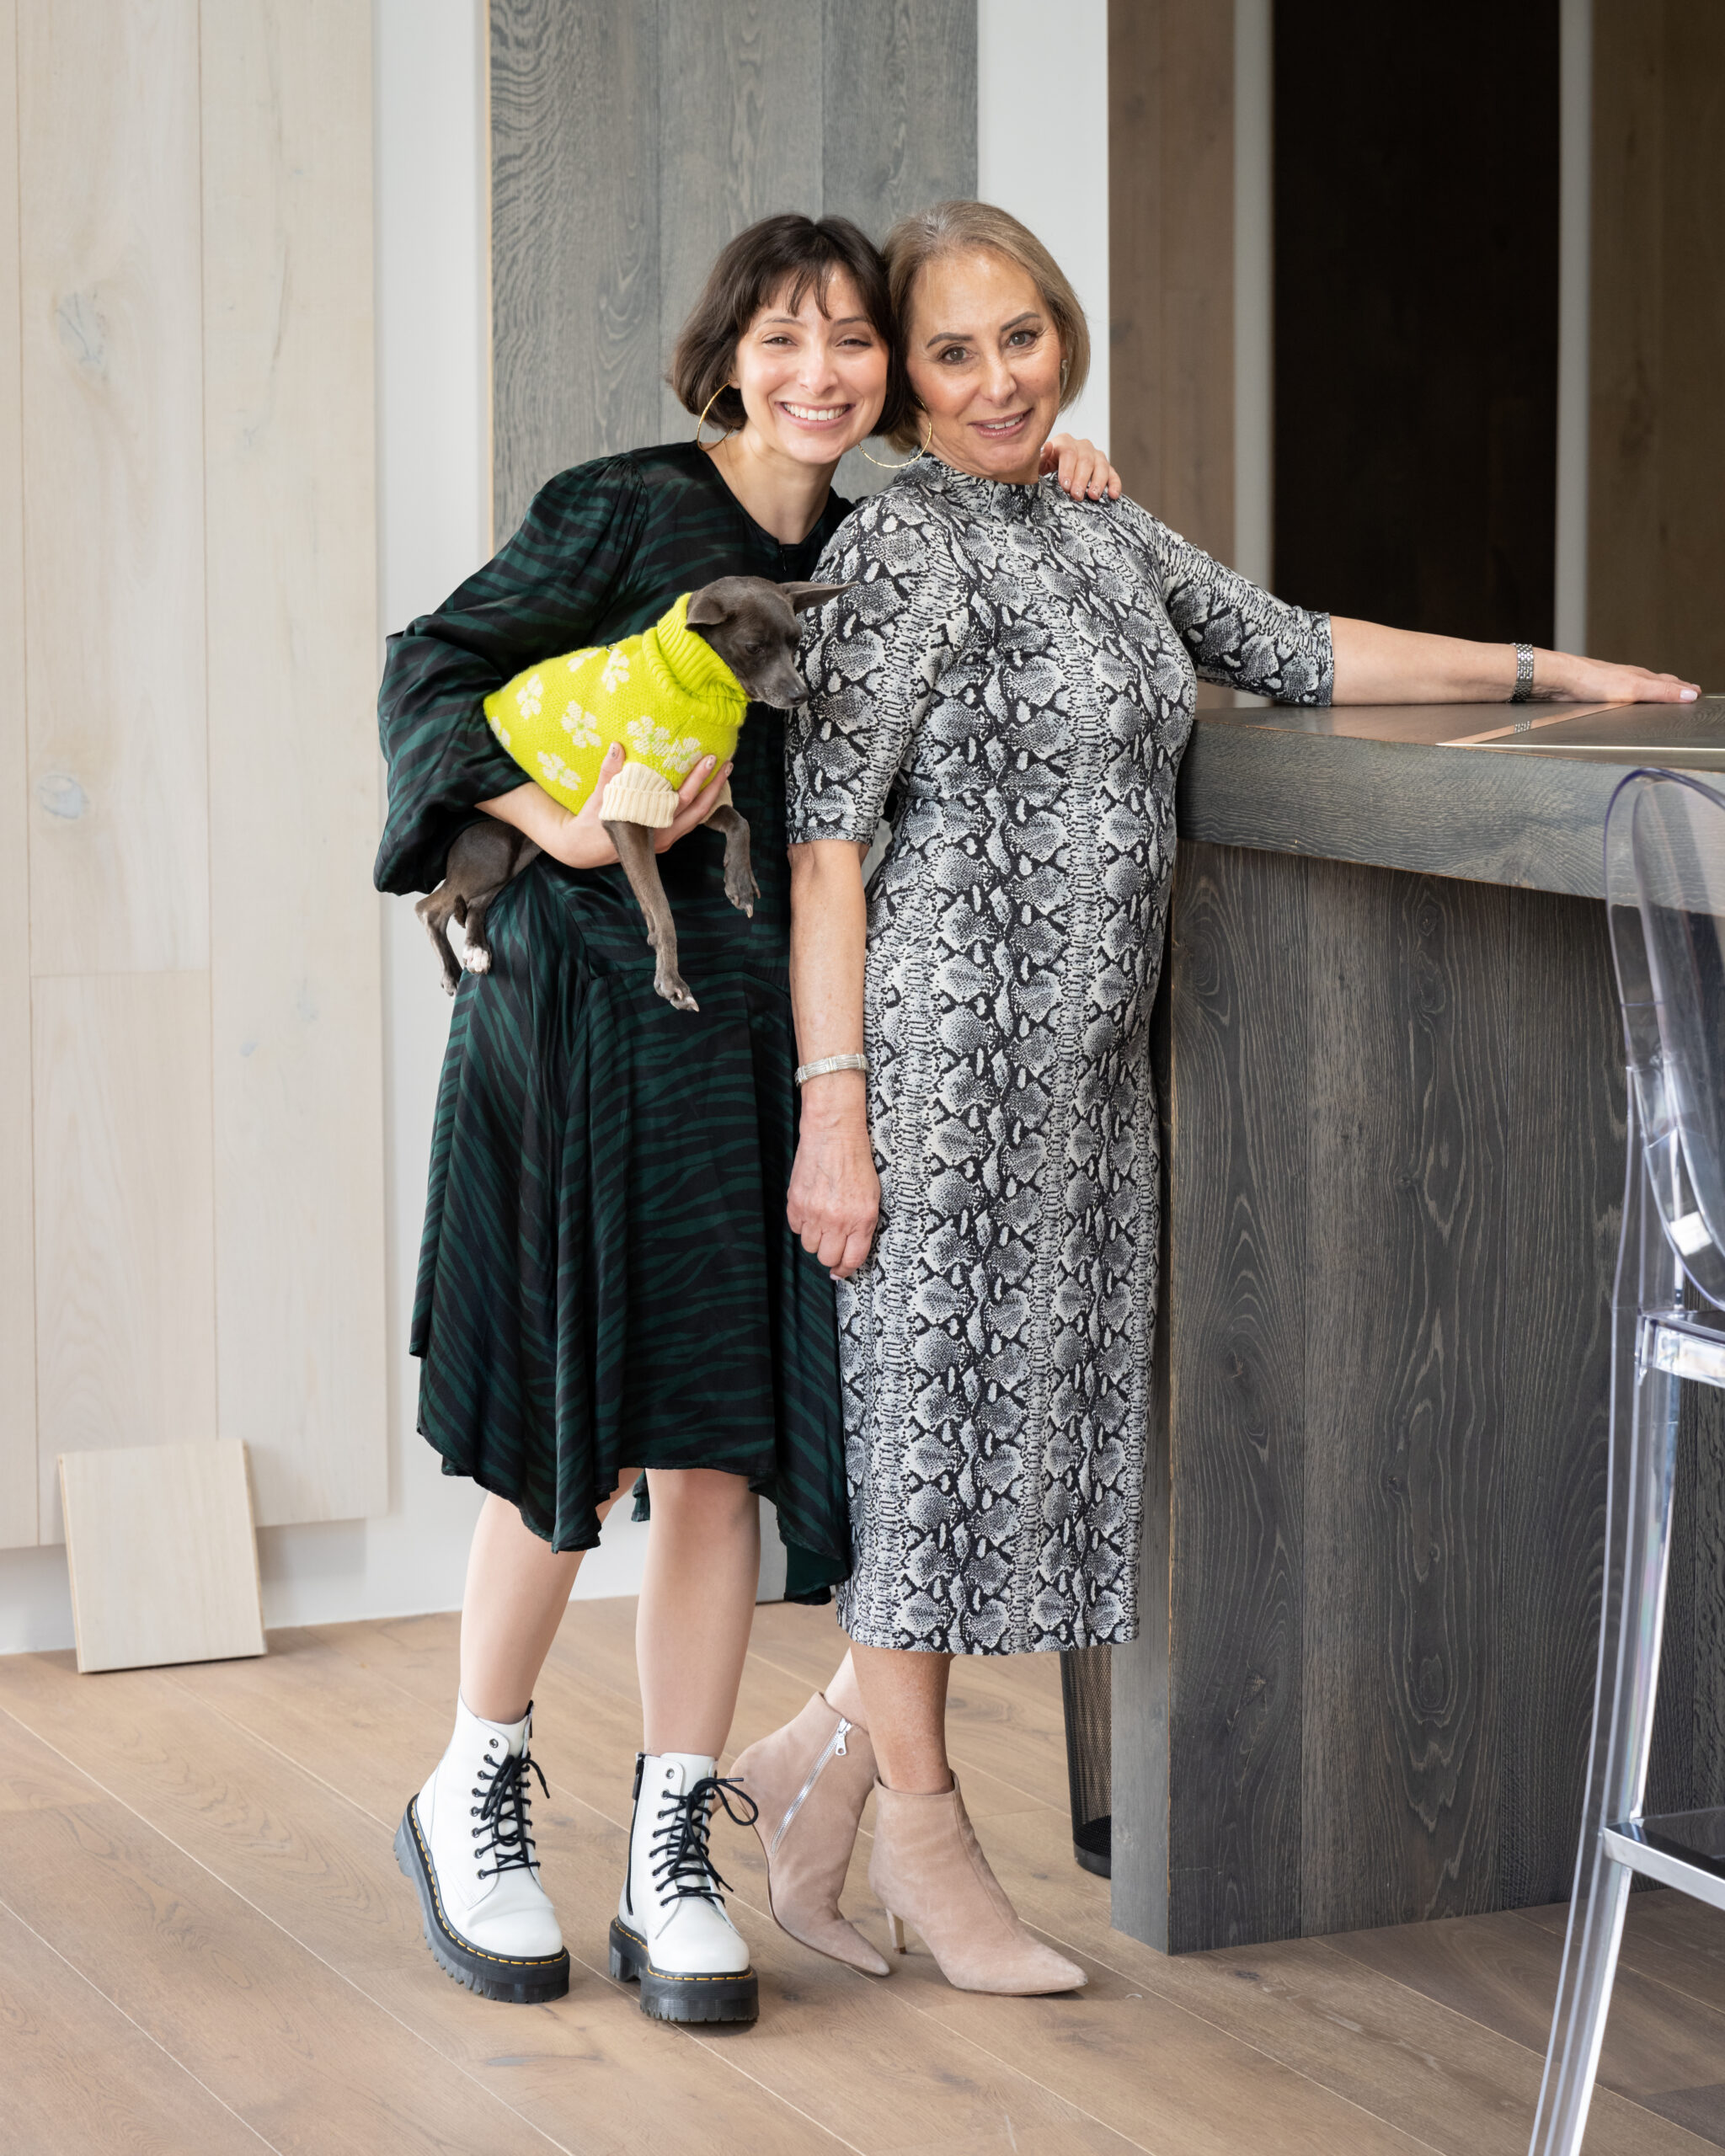 Wendy Melter, owner Unique Hardwood with daughter Marissa